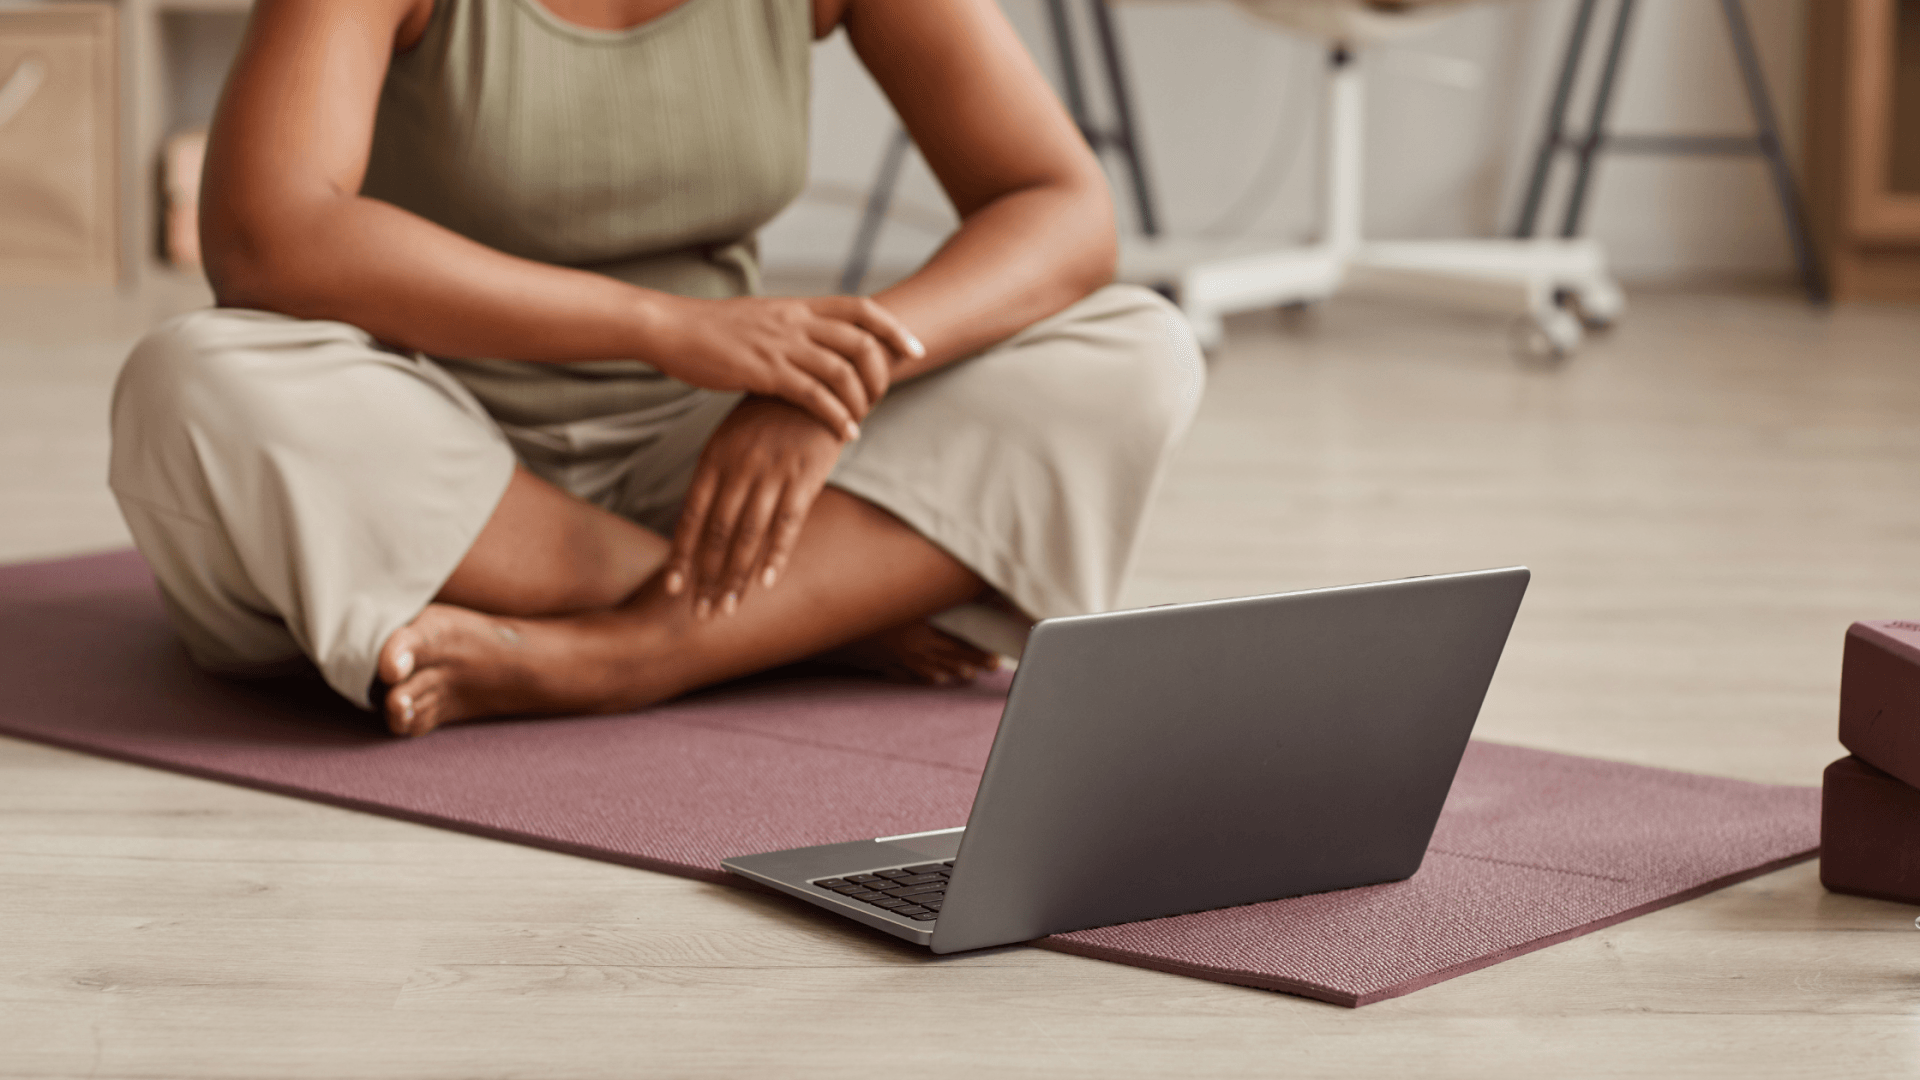 The Benefits of a Livestream (Zoom) Yoga Session